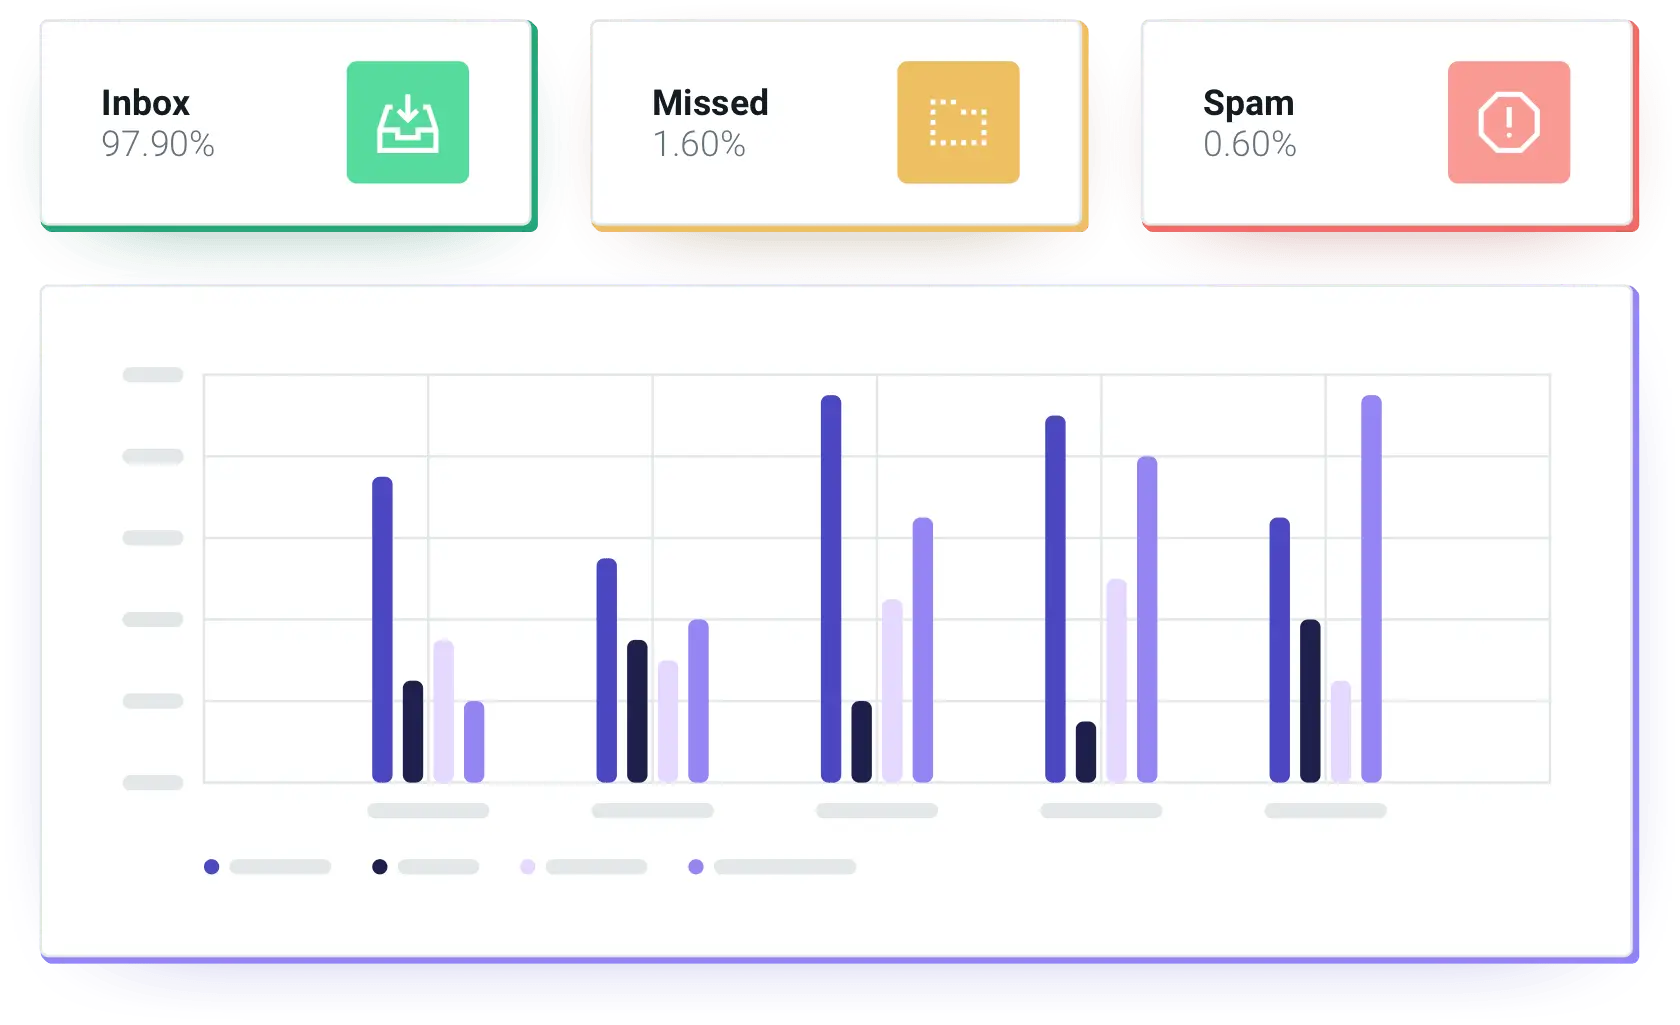 Report containing inbox, missed, and spam metrics.